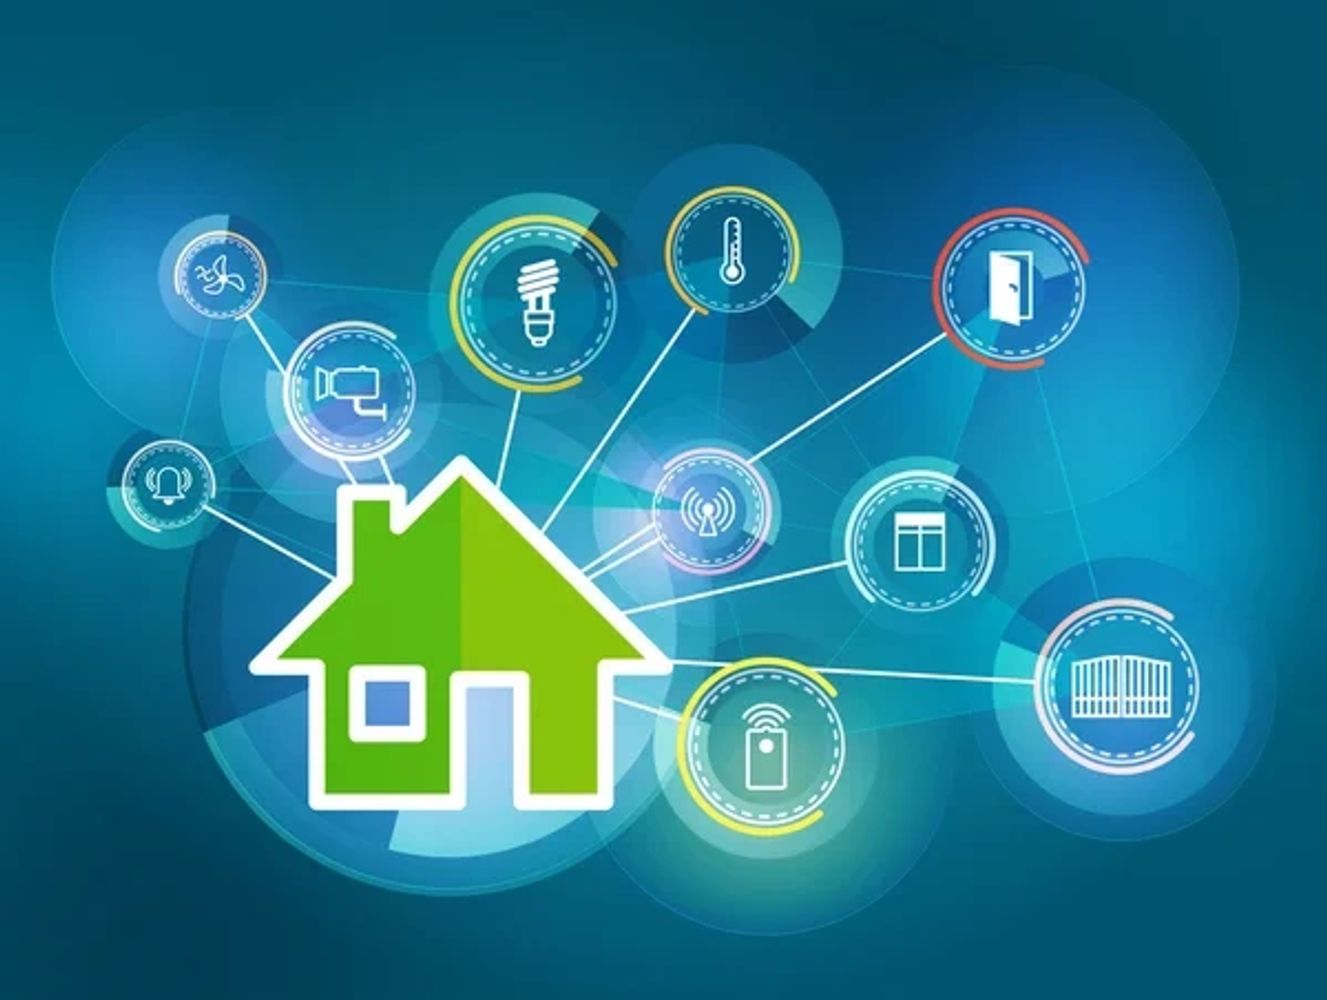 Illustration with several icons representing a smart home